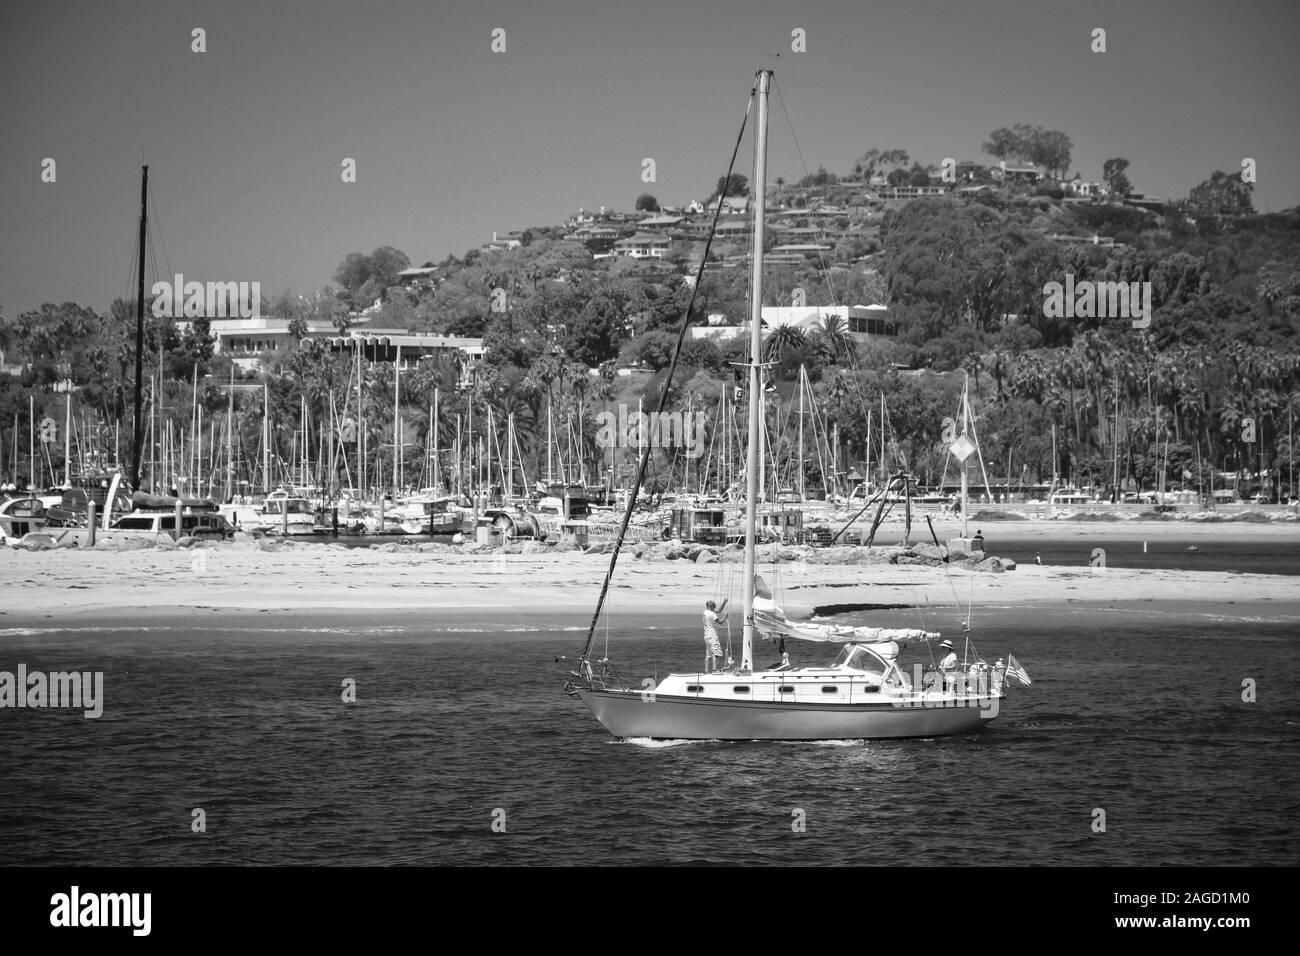 A man hoist the main sail while a woman steers a sailboat out of the Santa Barbara harbor towards the Pacific in Santa Barbara, CA, in black and white Stock Photo